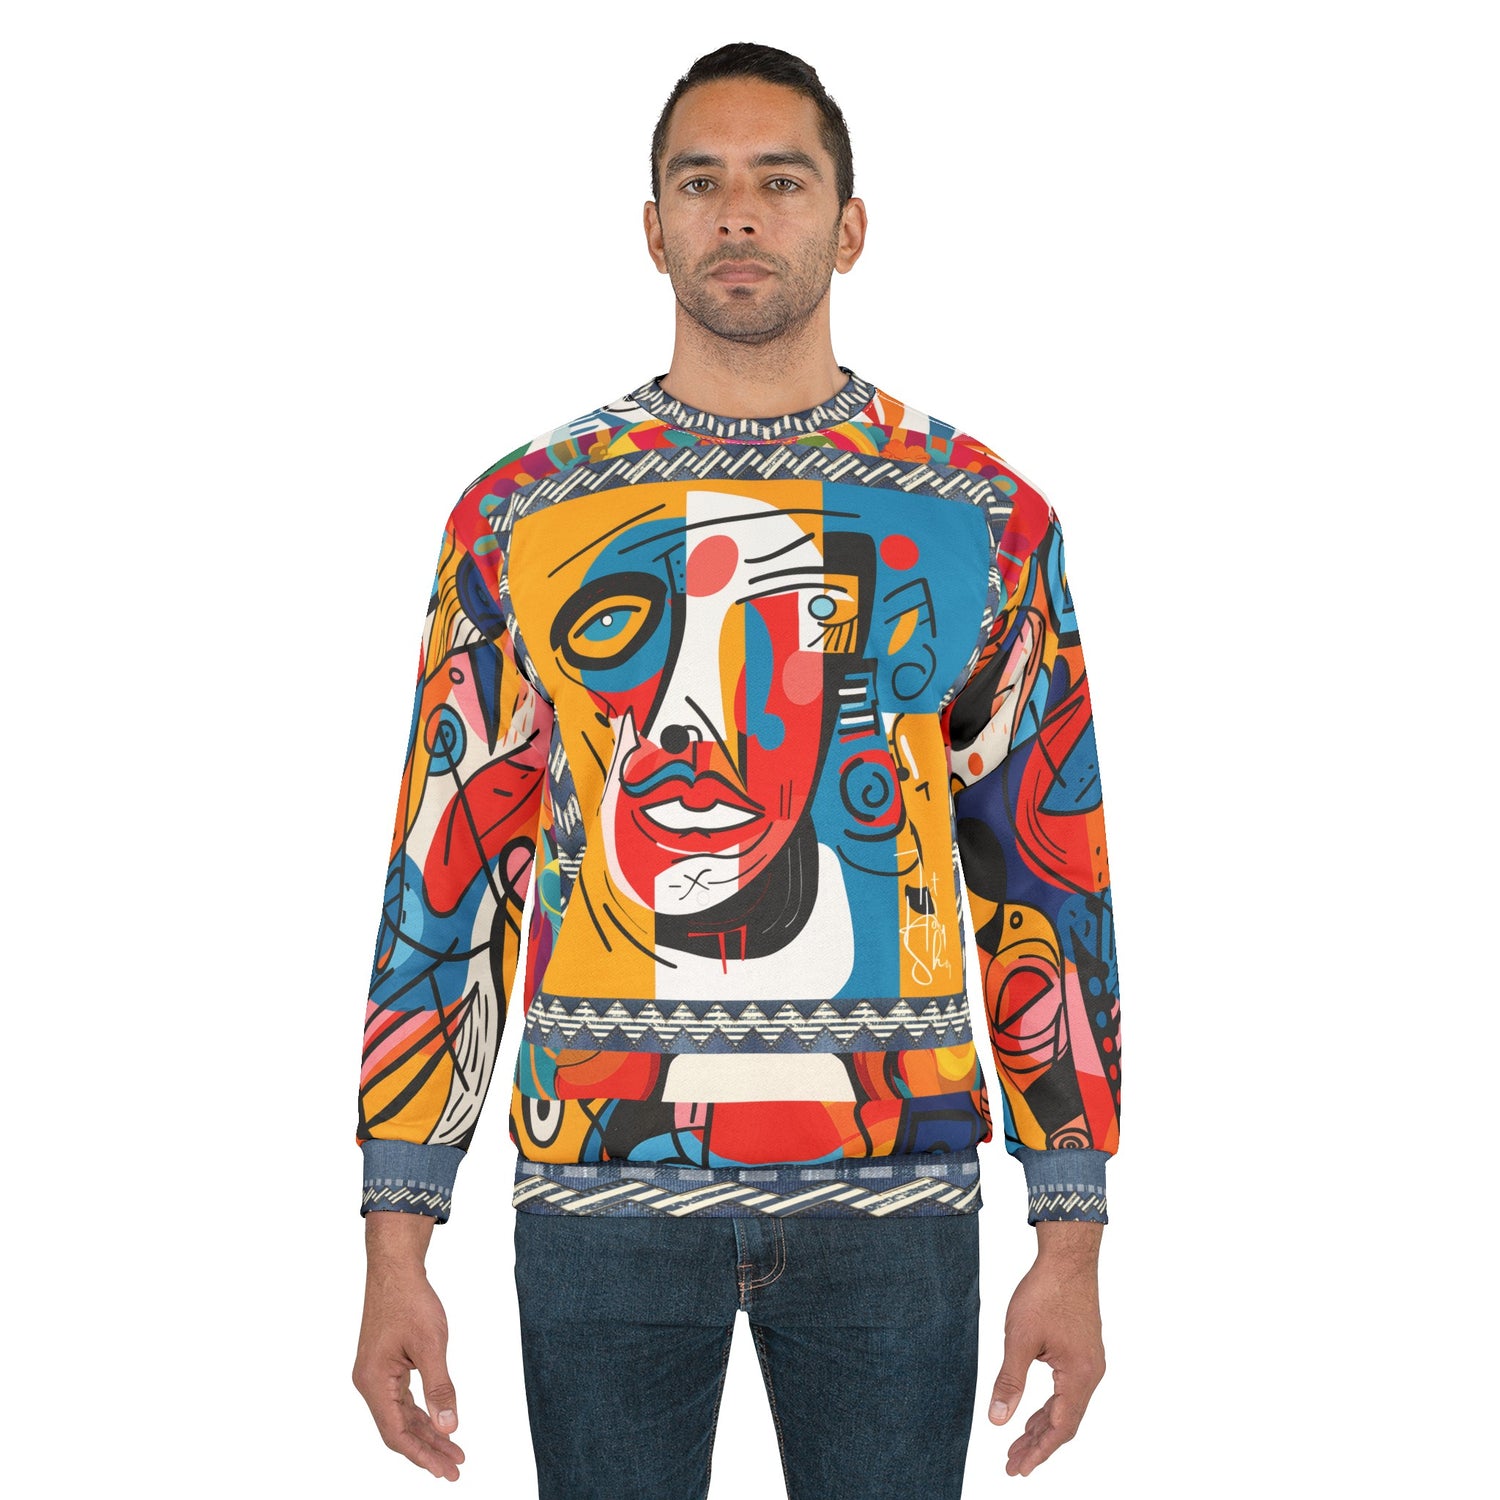 Pin the Tail Abstract Line Art Mid-Weight Polyester Unisex Sweatshirt (Gold Label)